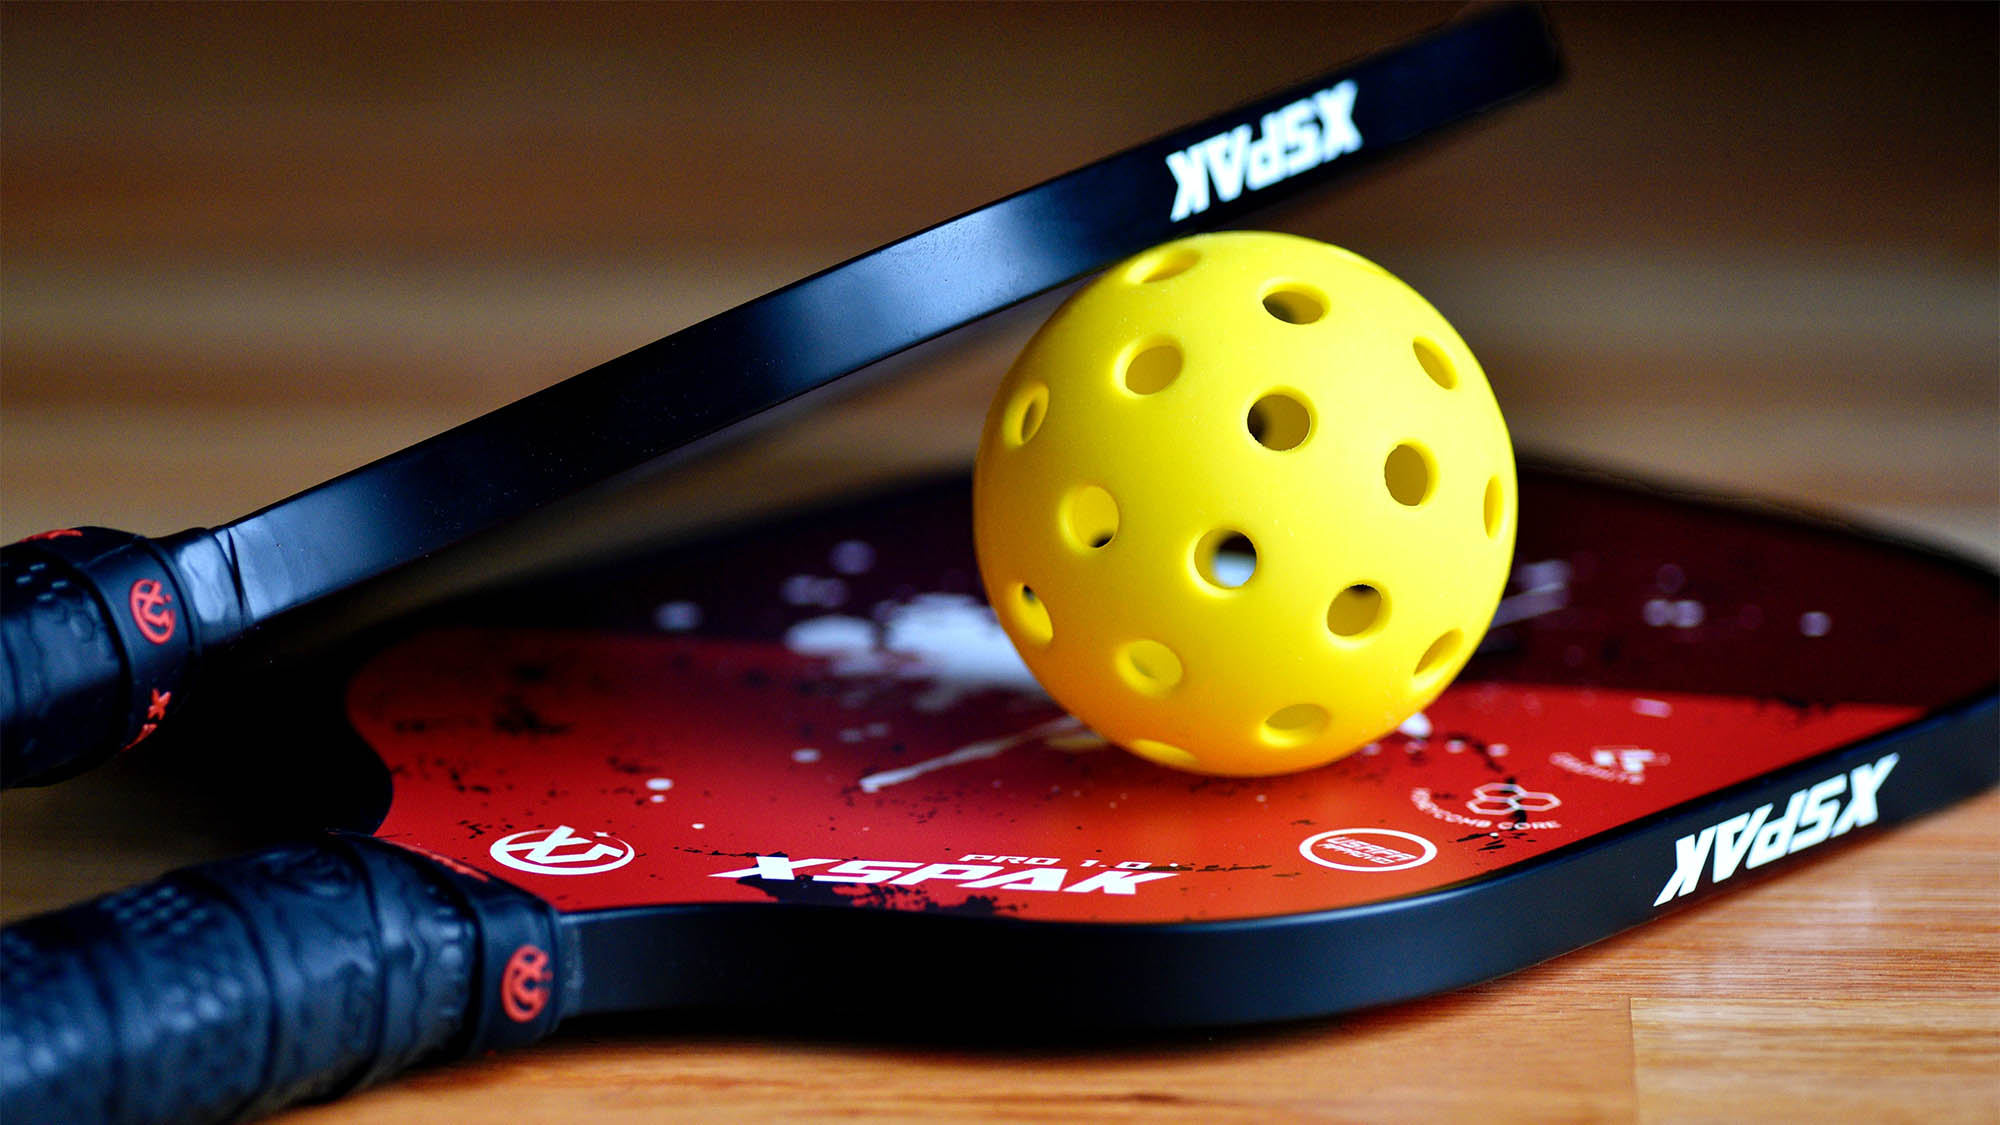 Red and black pickleball rackets with yellow pickleball in between